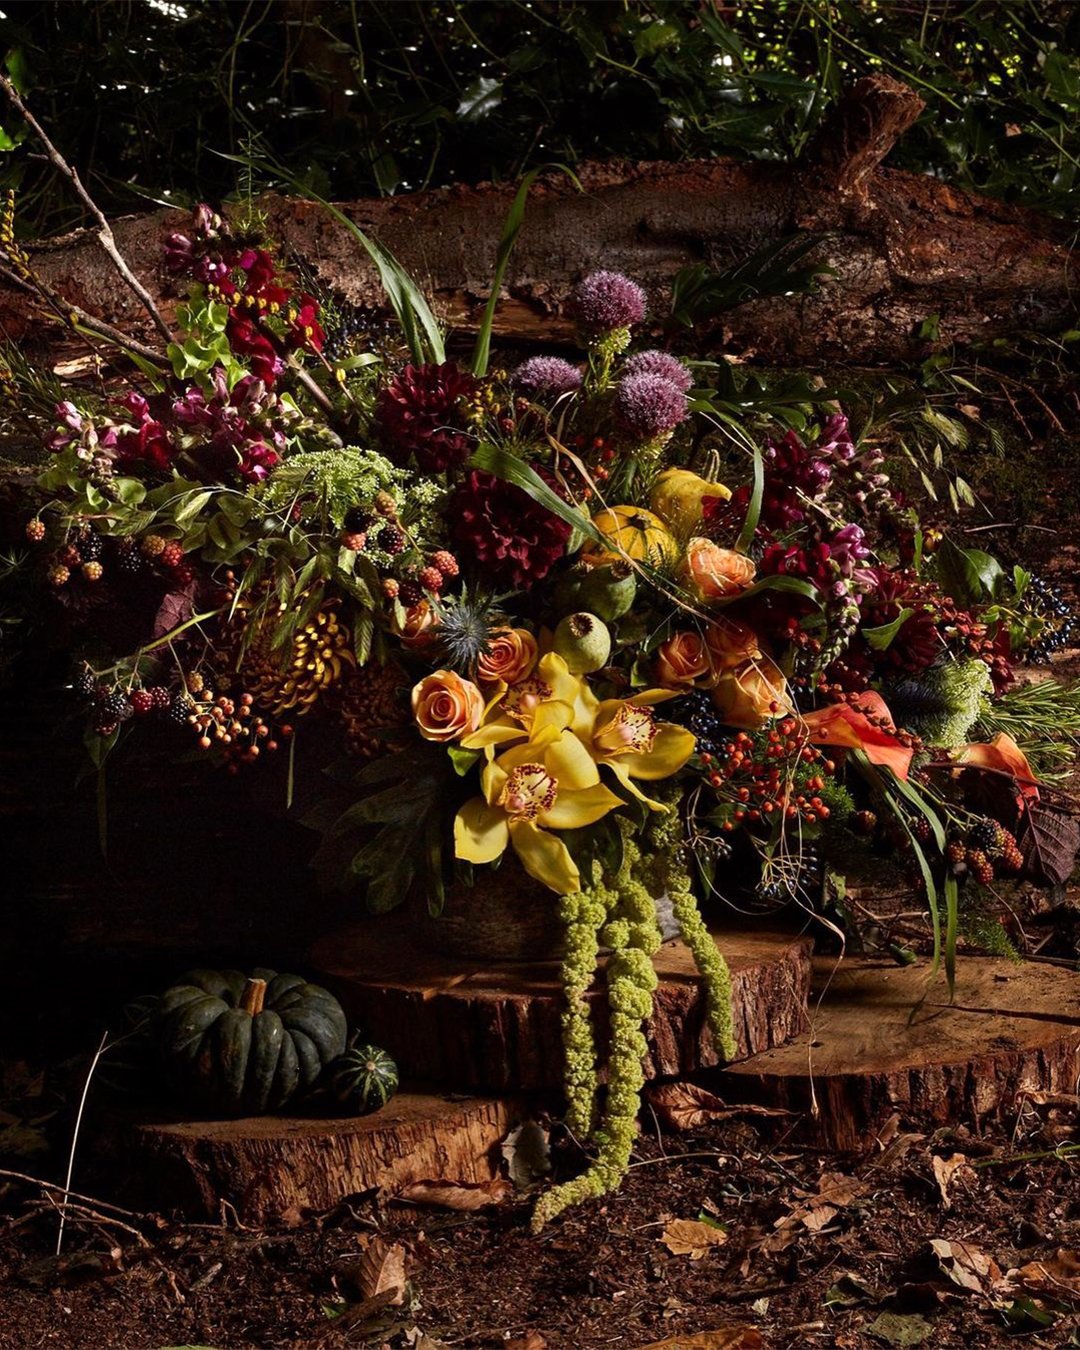 fall wedding bouquets with fall fruits and veggies